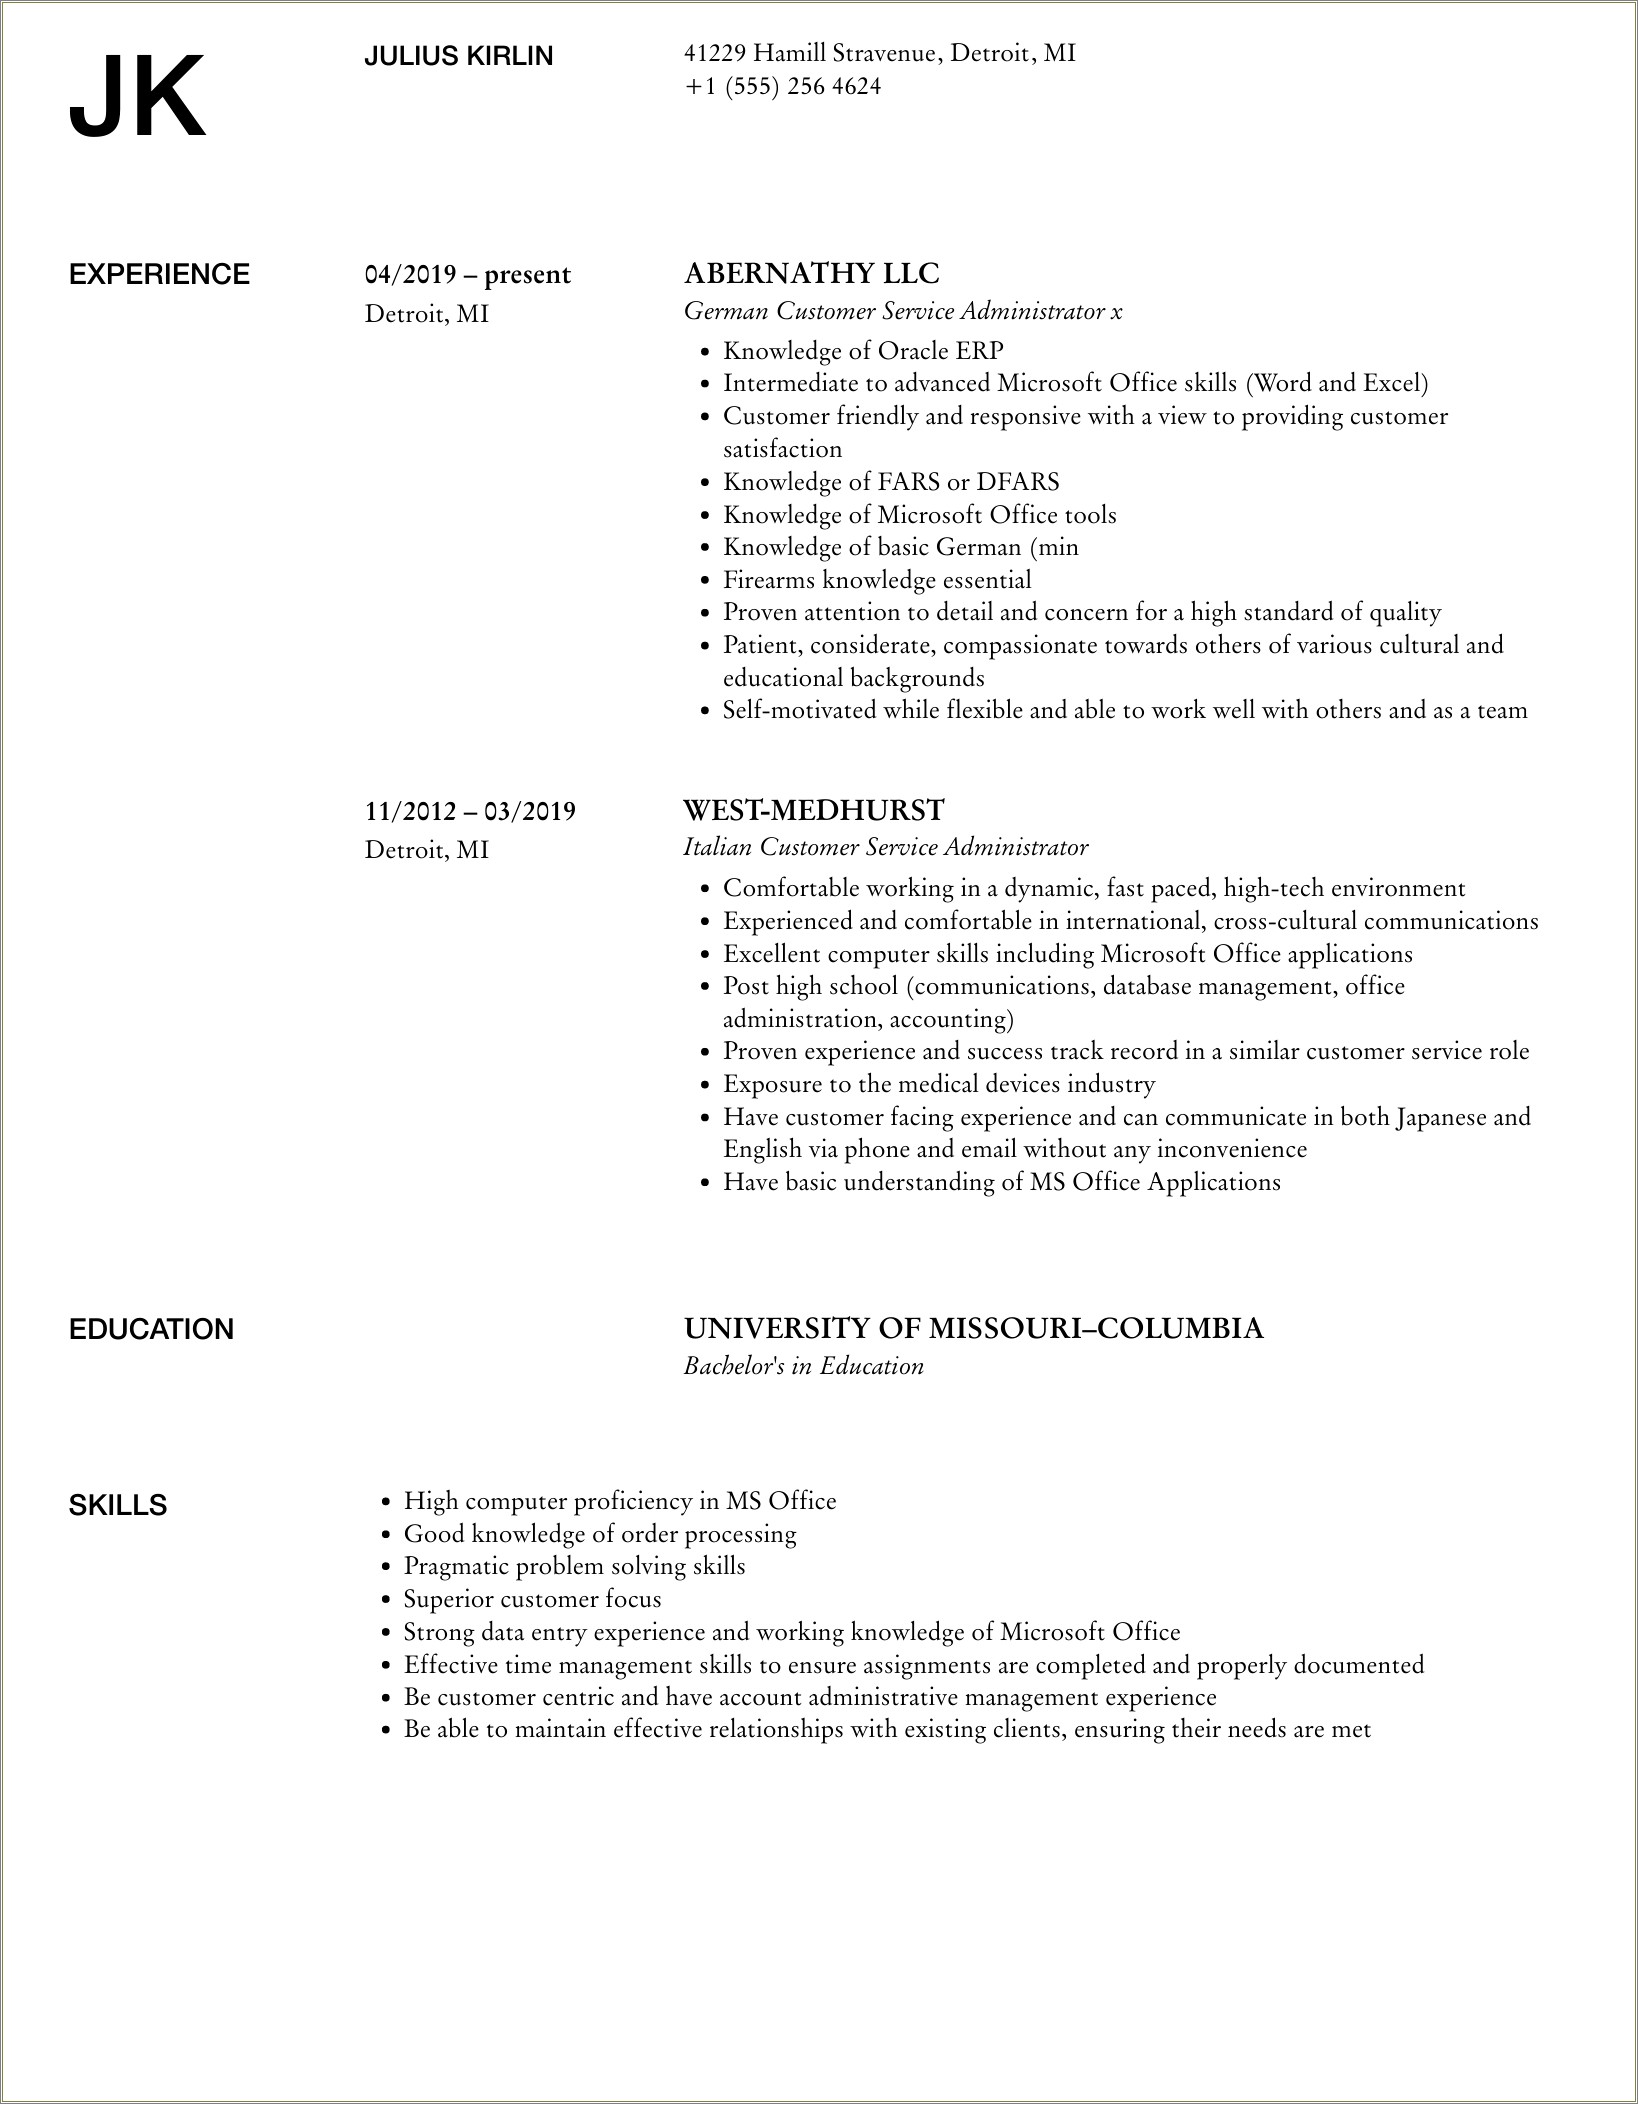 Resume Objective For Customer Service And Administration